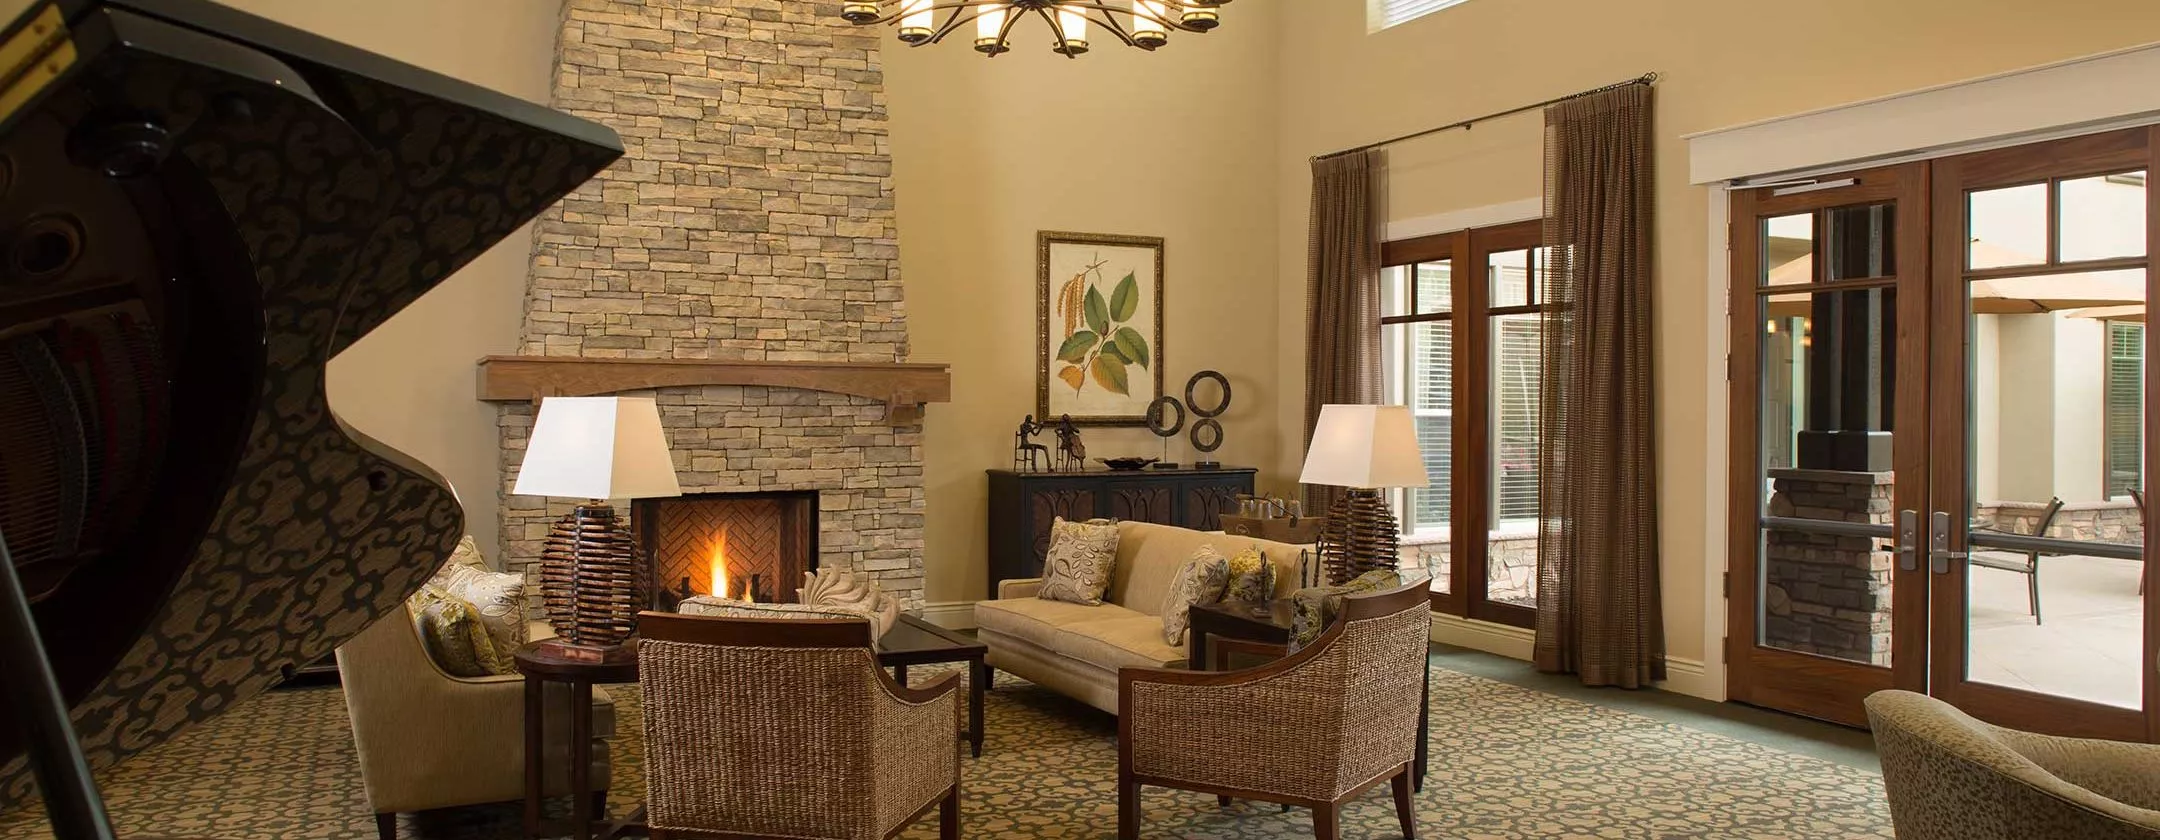 Whittier lounge with fire place and piano